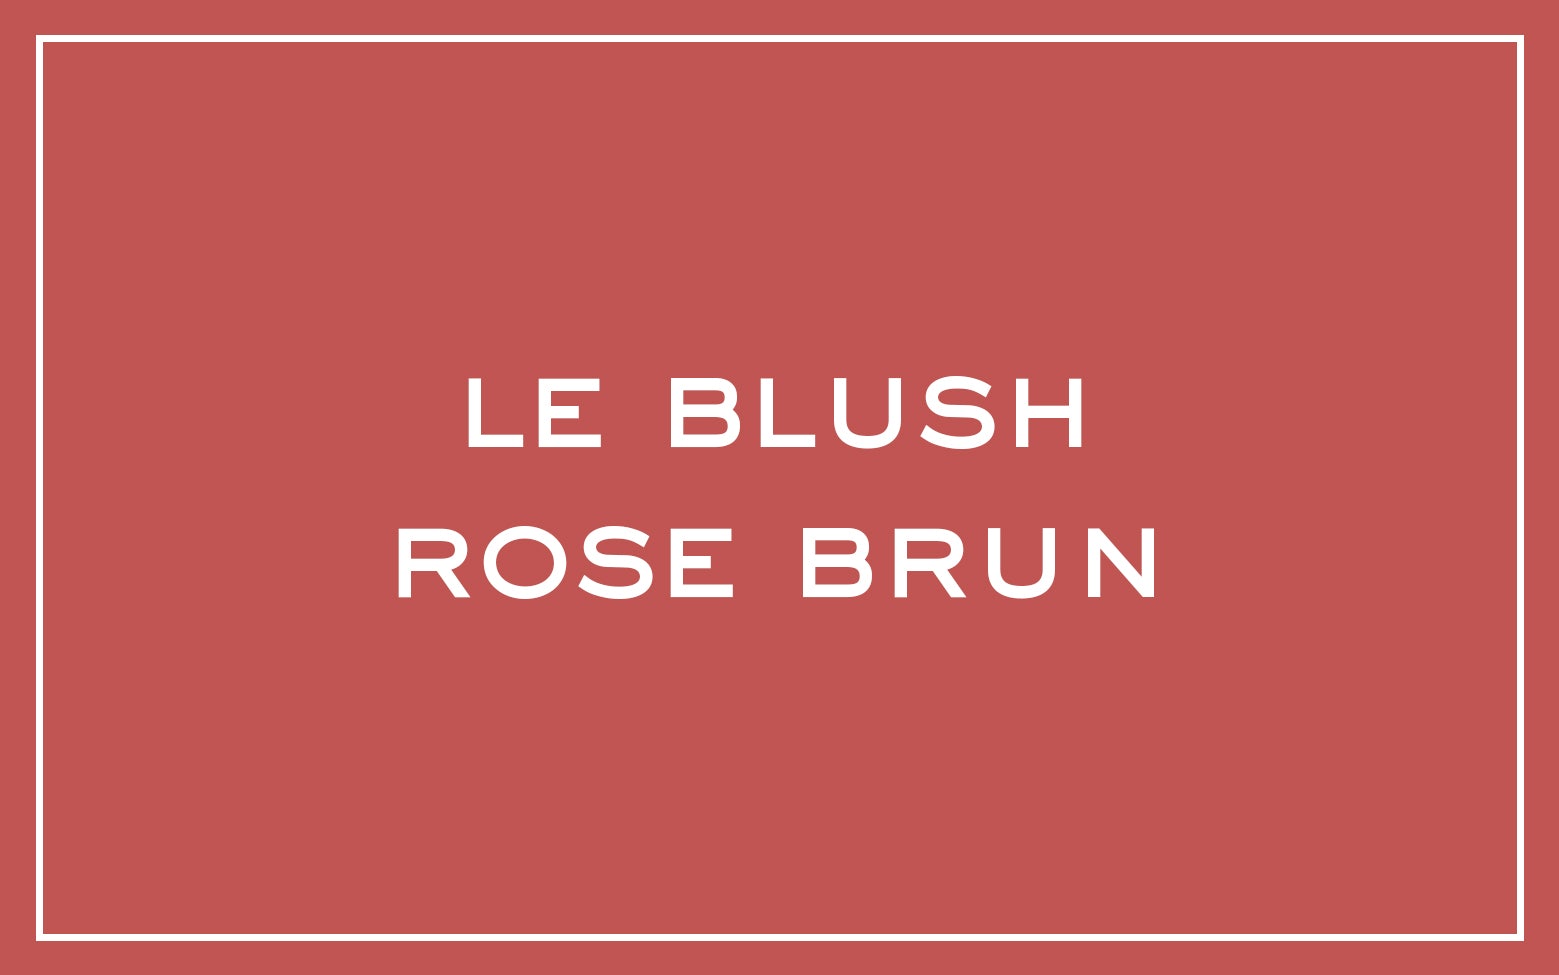 La bouche rouge Brown Pink Blush swatch with text